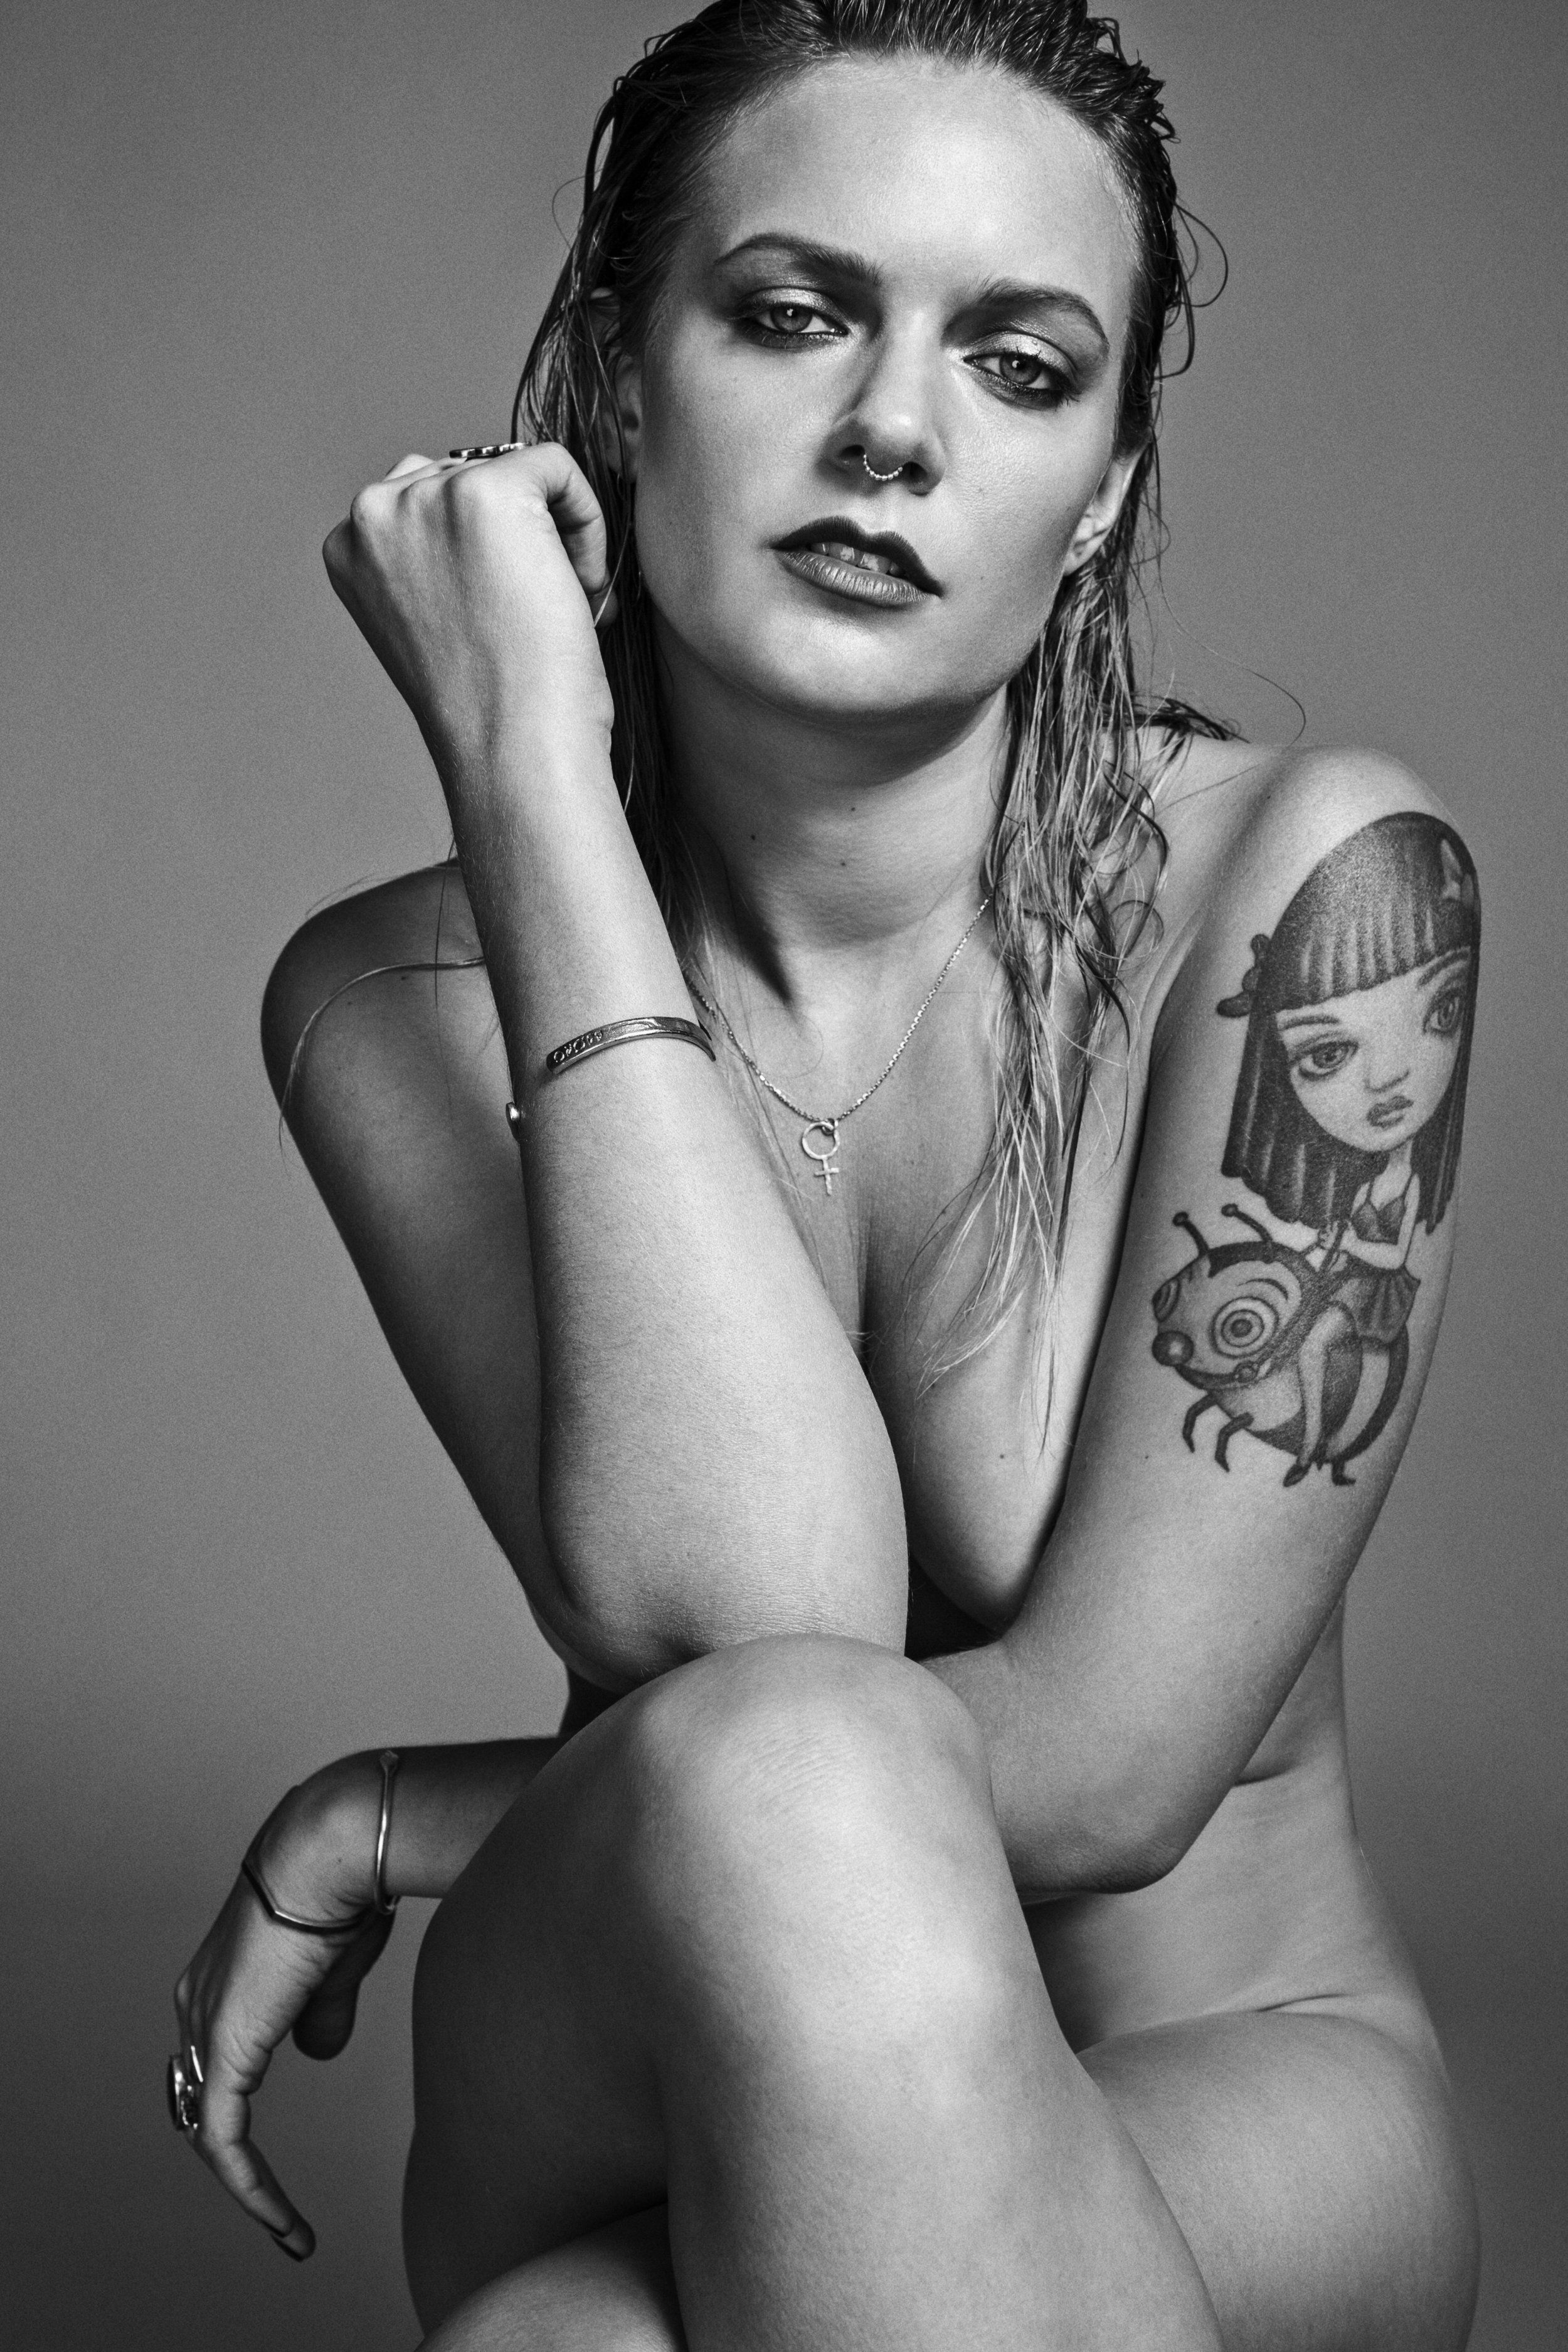 Tove lo foto in topless
 #79600561